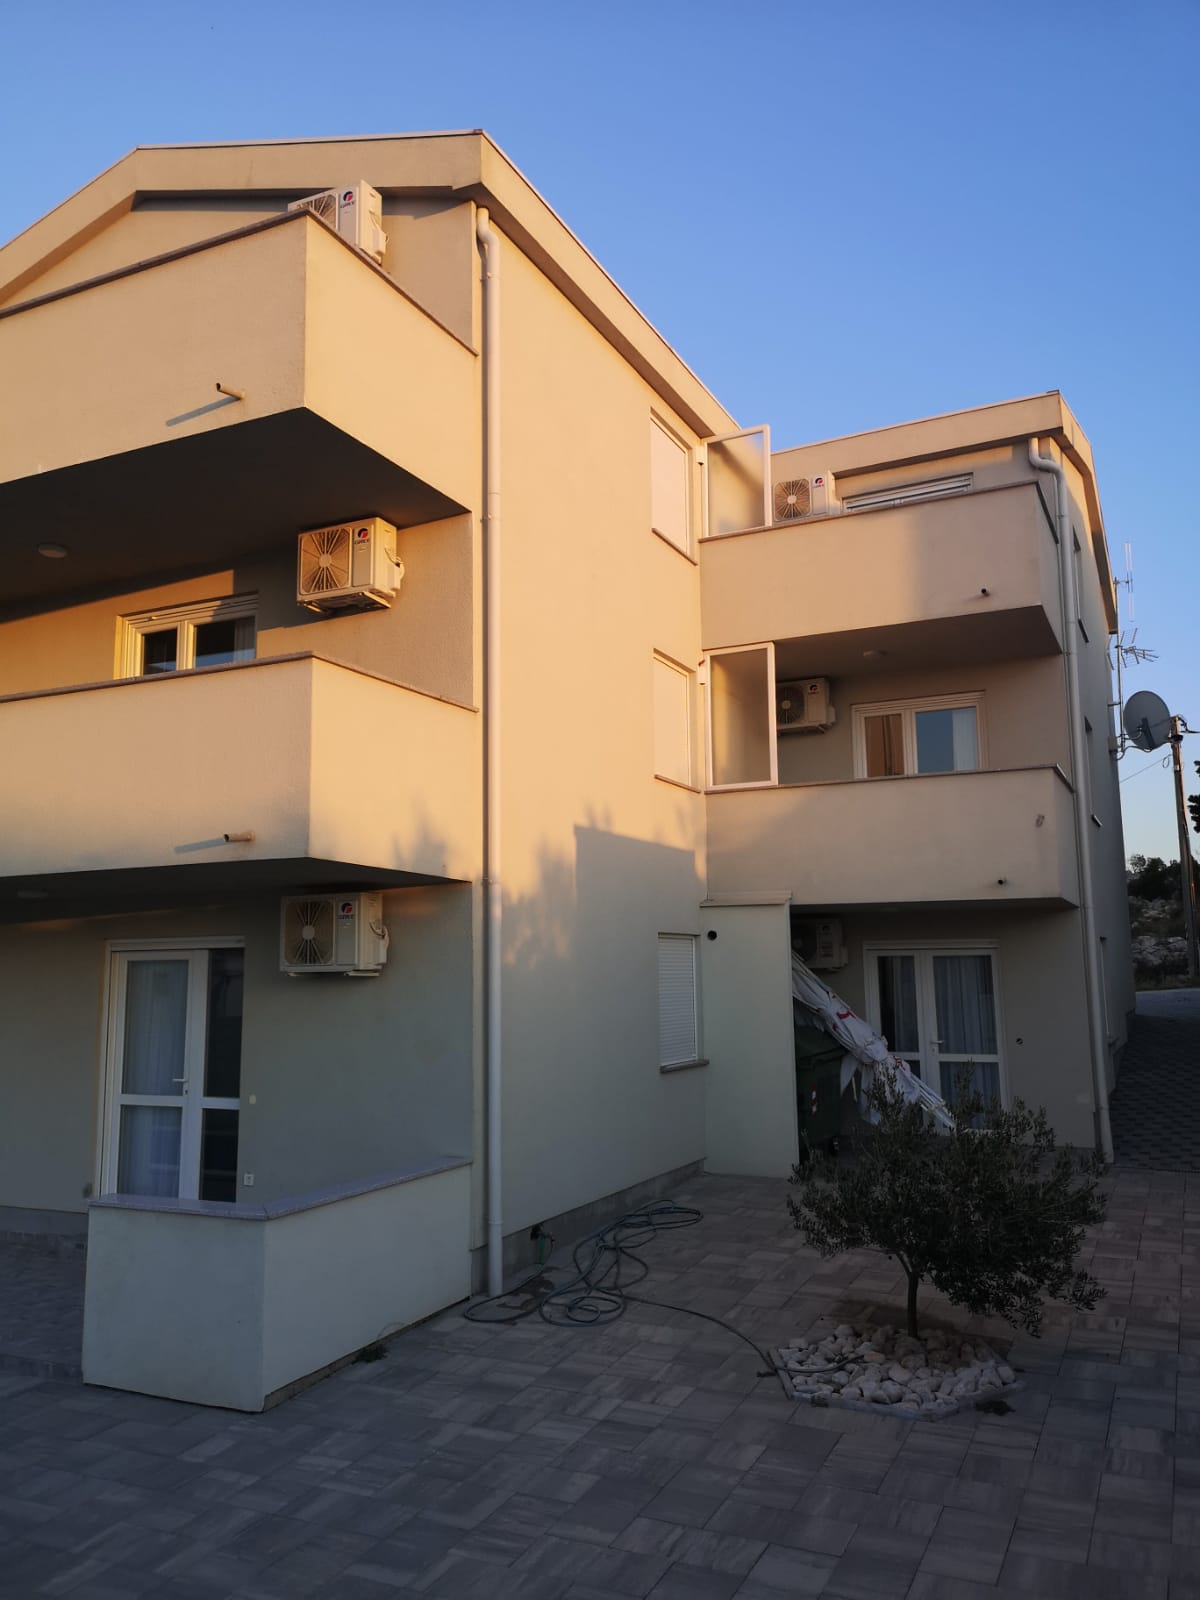 Apartment house for sale in Cesarica Kvarner